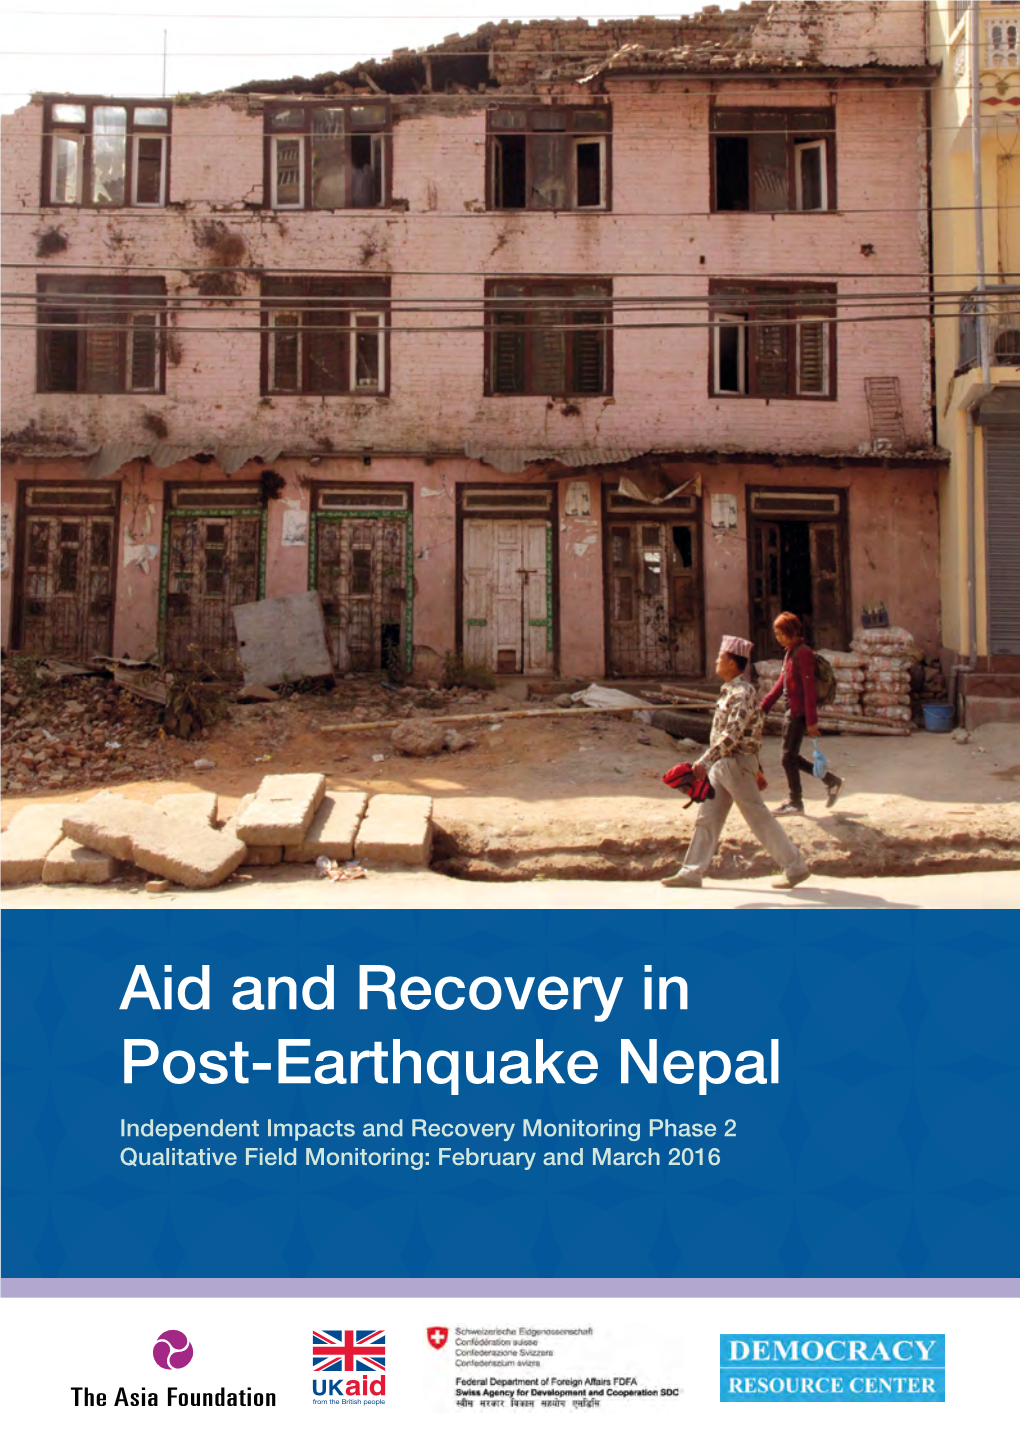 Aid and Recovery in Post-Earthquake Nepal — Qualitative Field Monitoring: February and March 2016